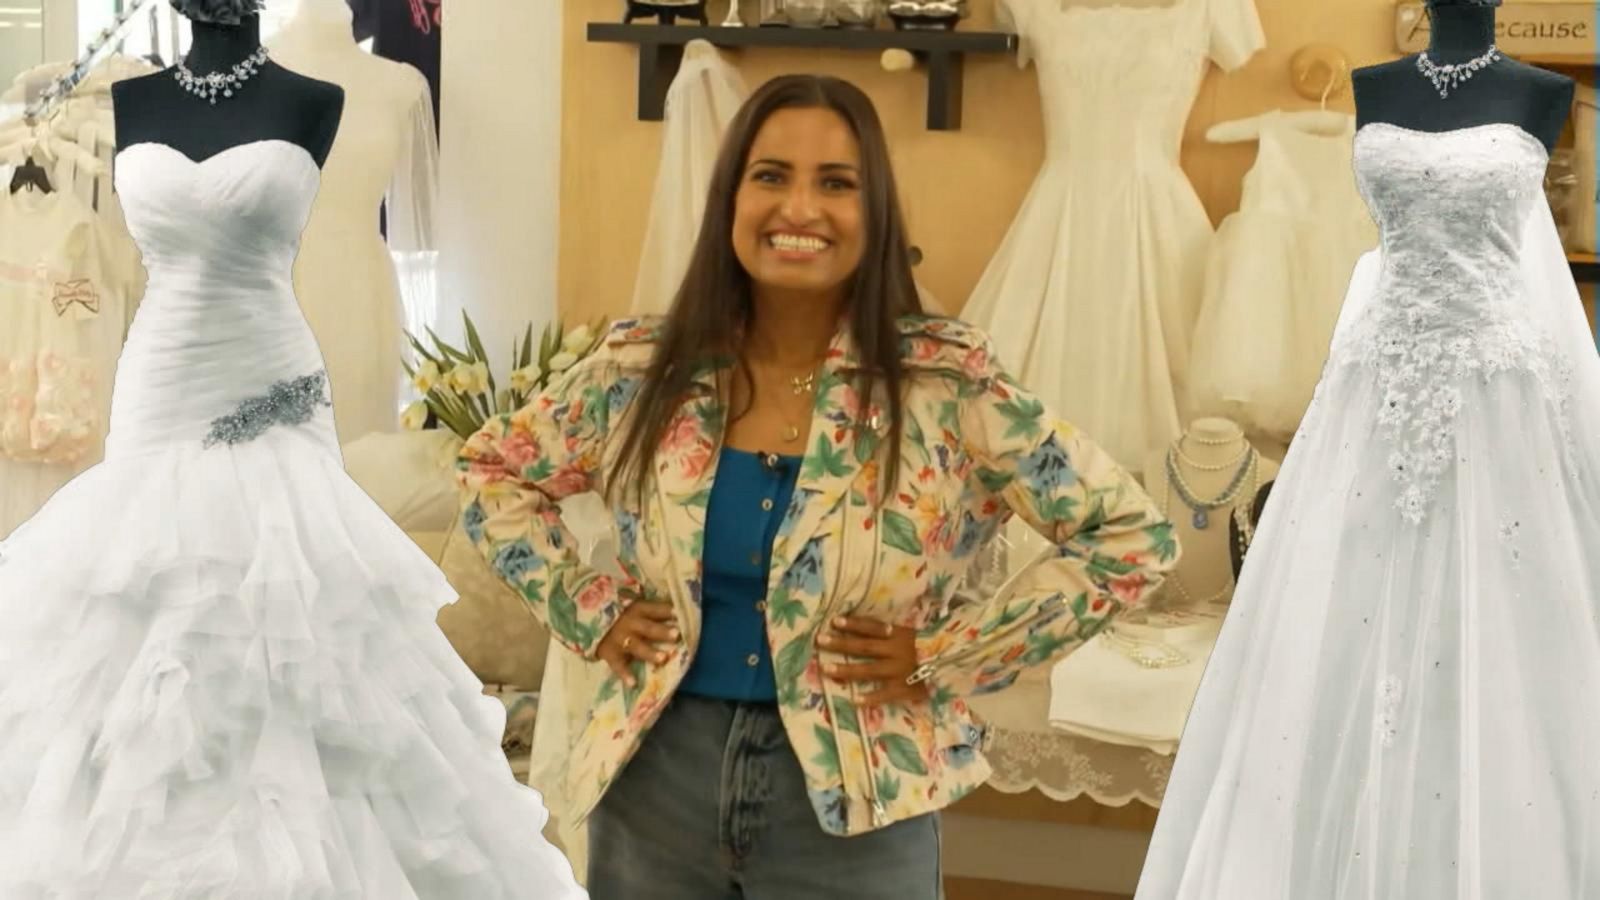 VIDEO: How to thrift the best bridal attire